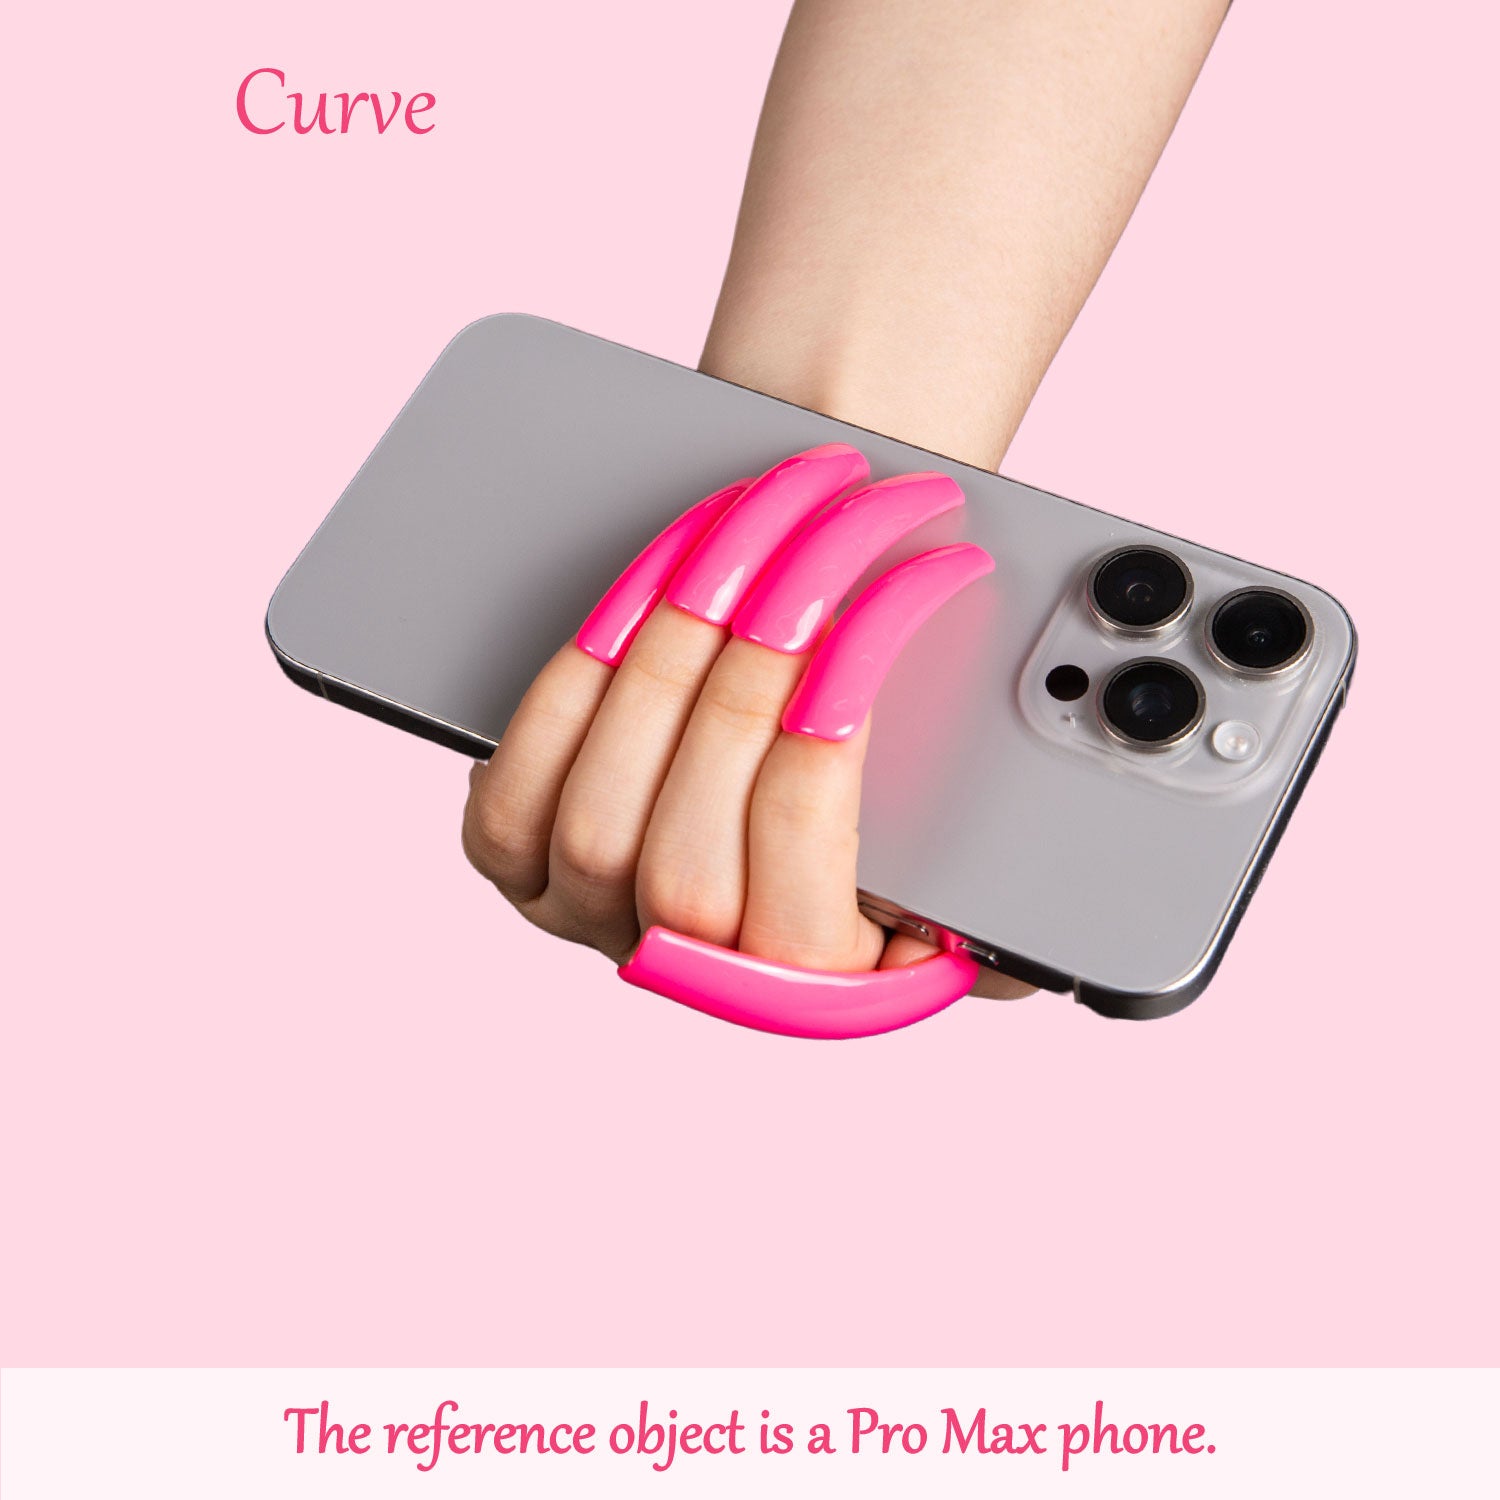 Hand with long, pink, curved press-on nails holding a Pro Max phone. Text reads 'Curve' and 'The reference object is a Pro Max phone.'